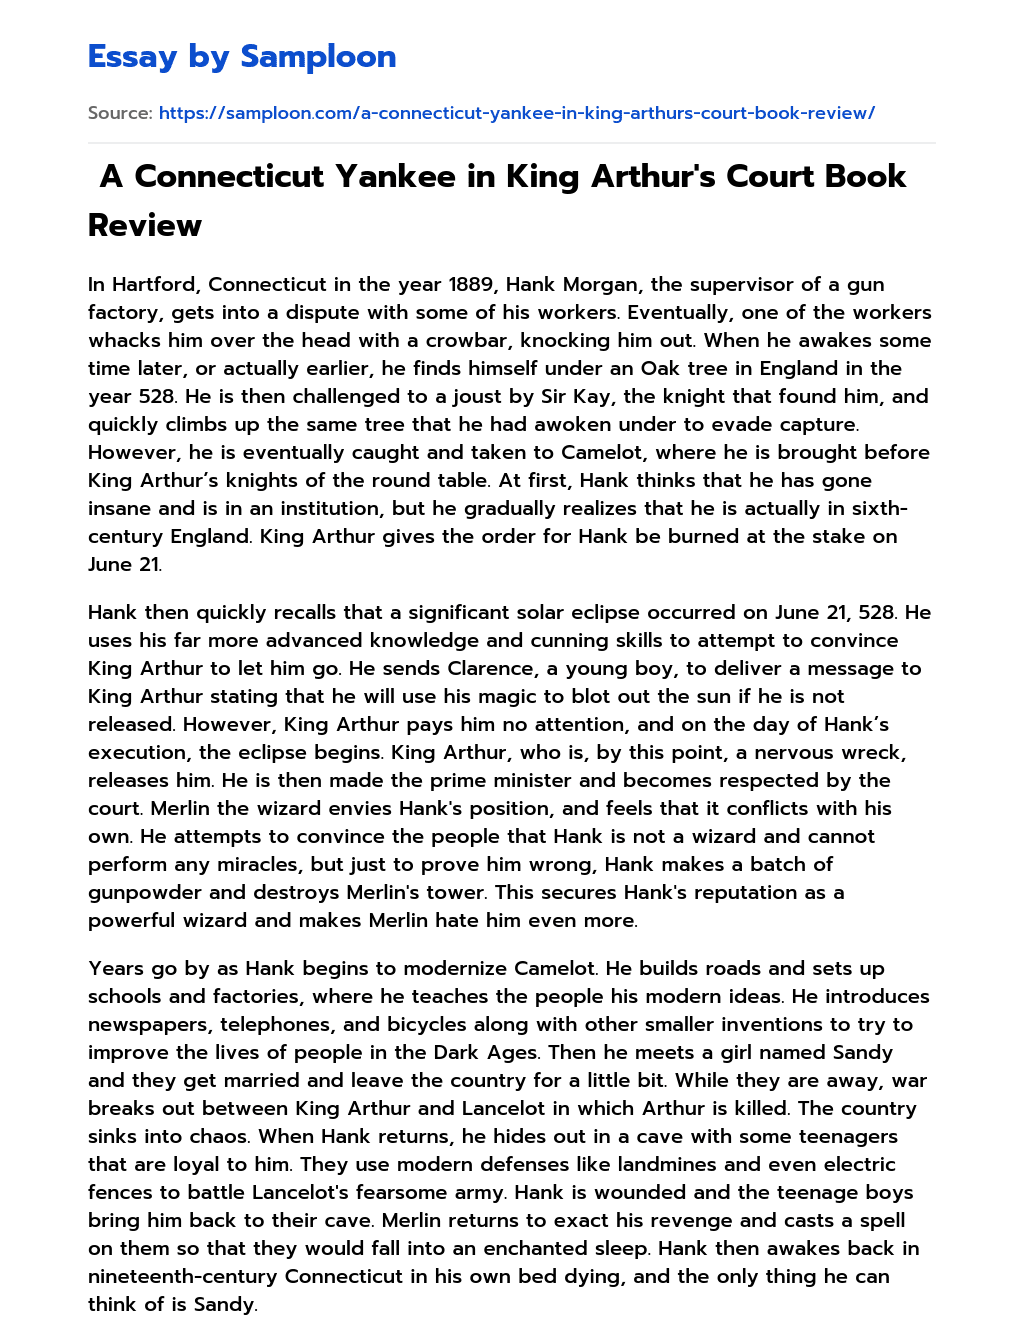  A Connecticut Yankee in King Arthur’s Court Book Review essay